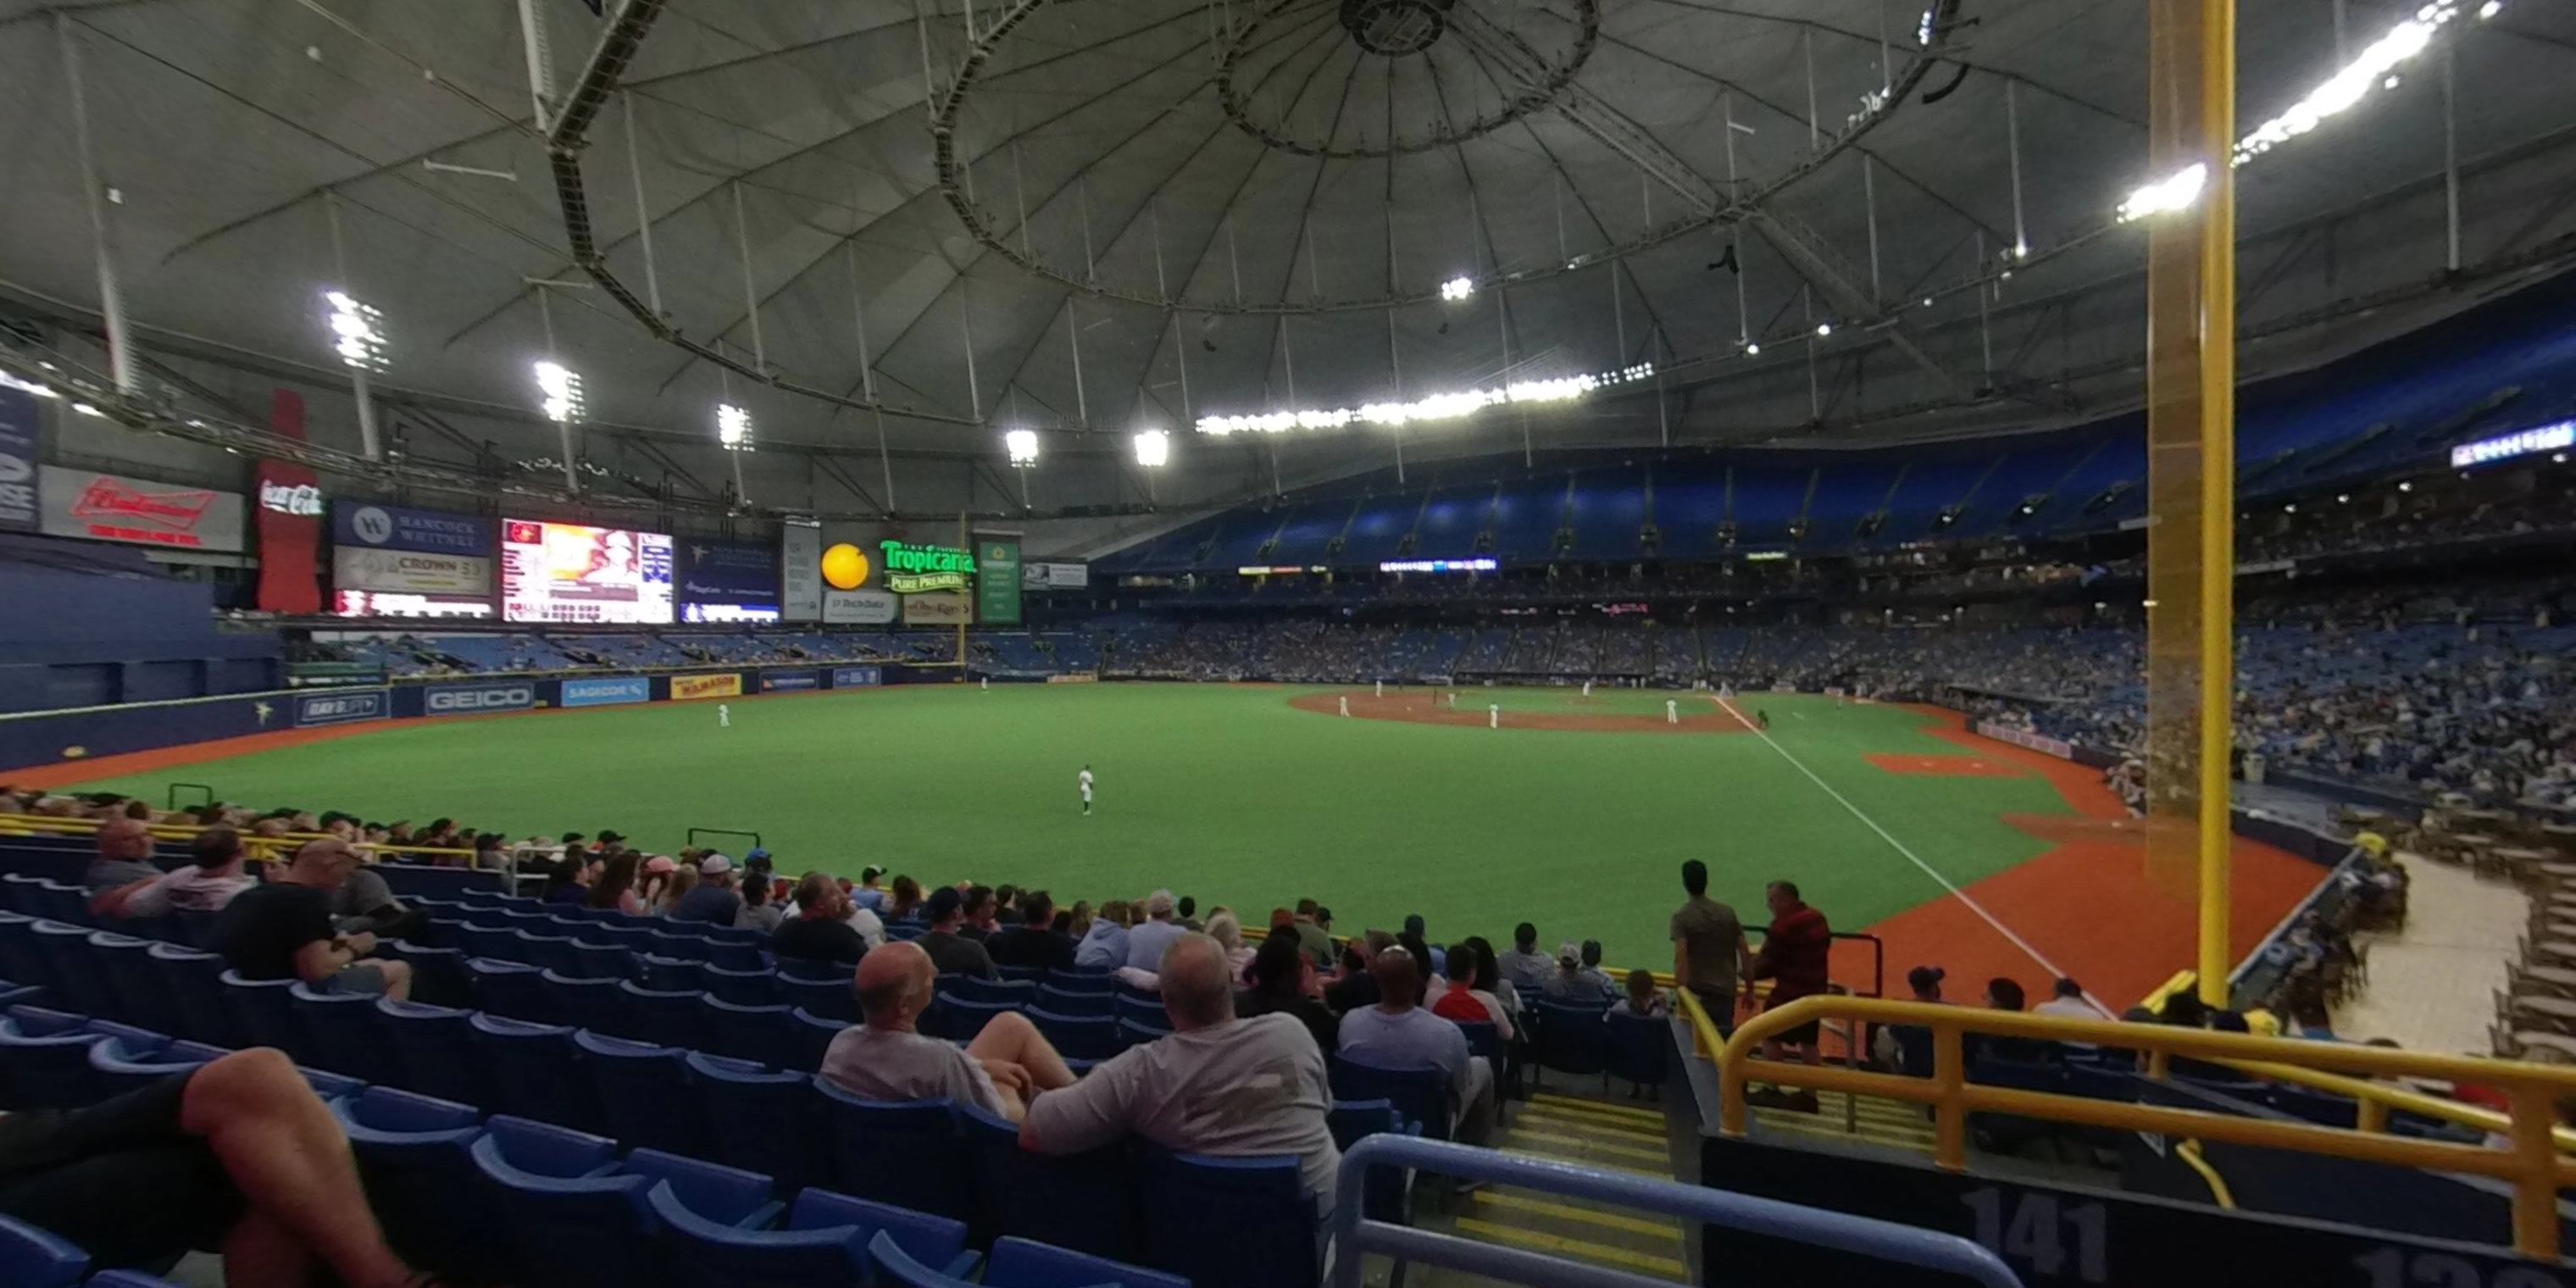 section 141 panoramic seat view  for baseball - tropicana field